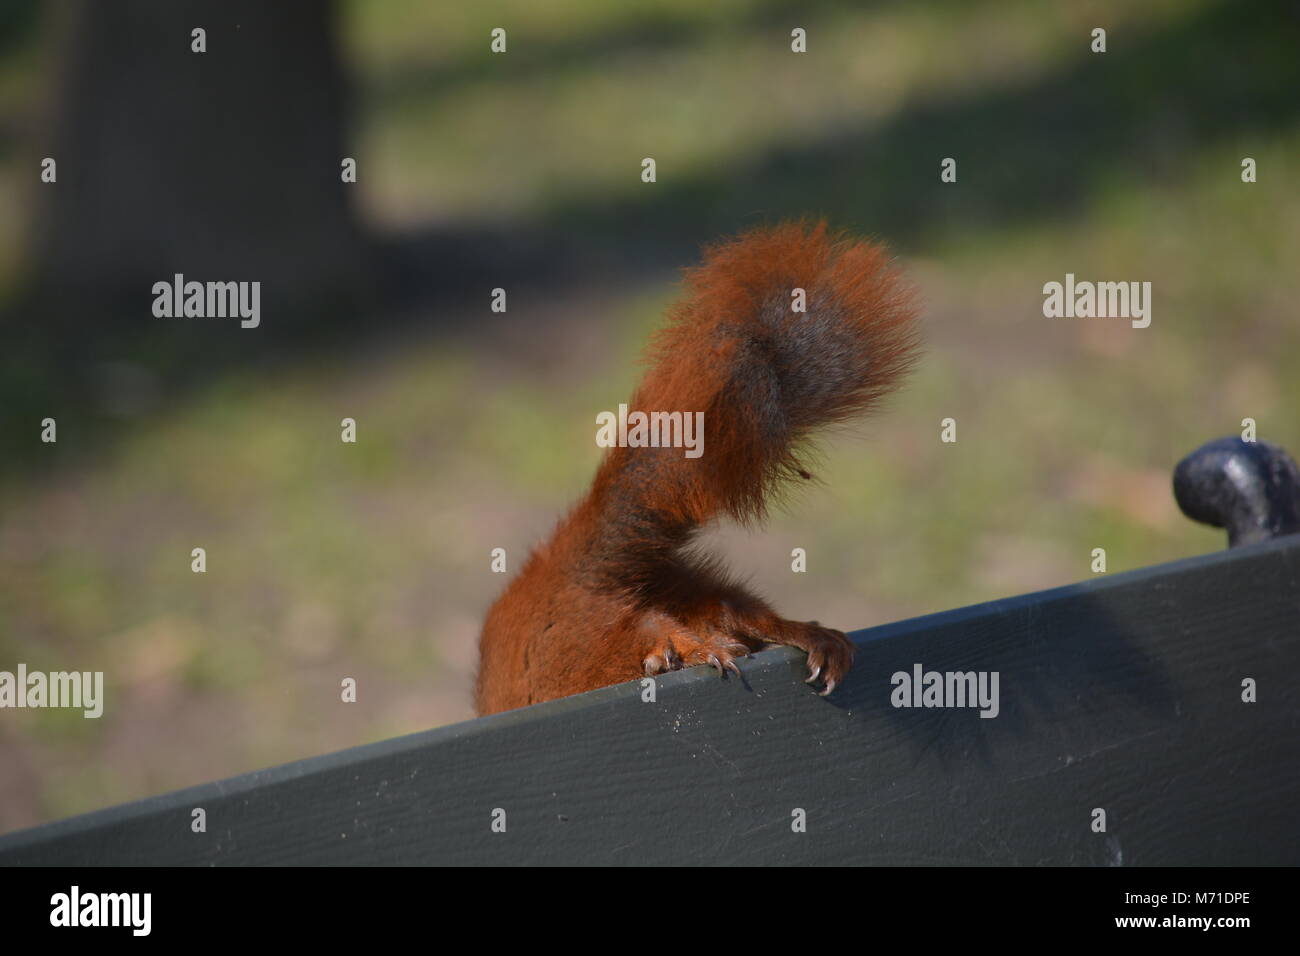 Red squirrel running off a park bench Stock Photo